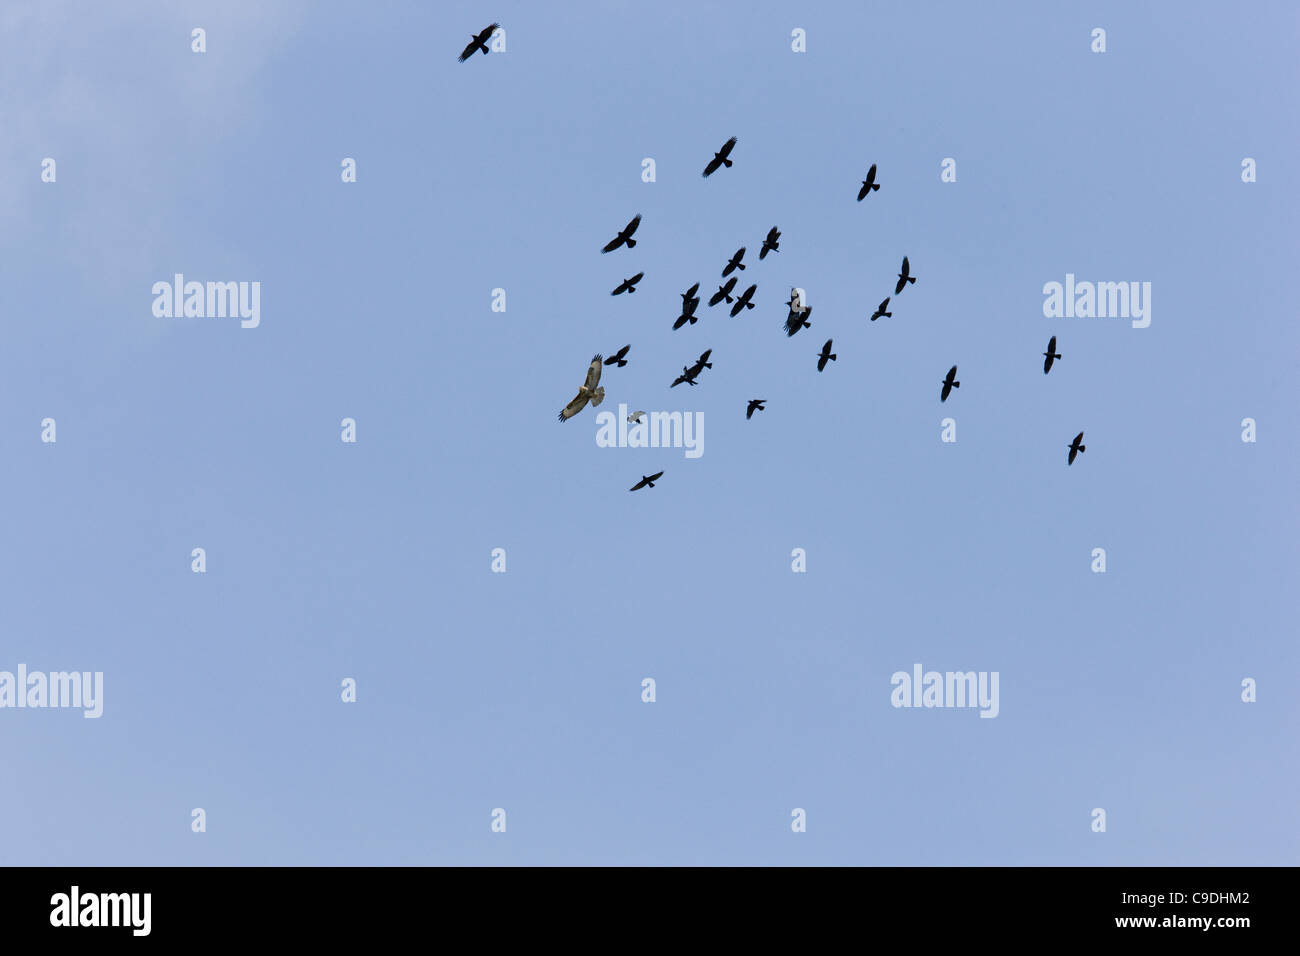 Flock of crows and jackdaws mobbing two buzzards soaring on thermal air currents Stock Photo